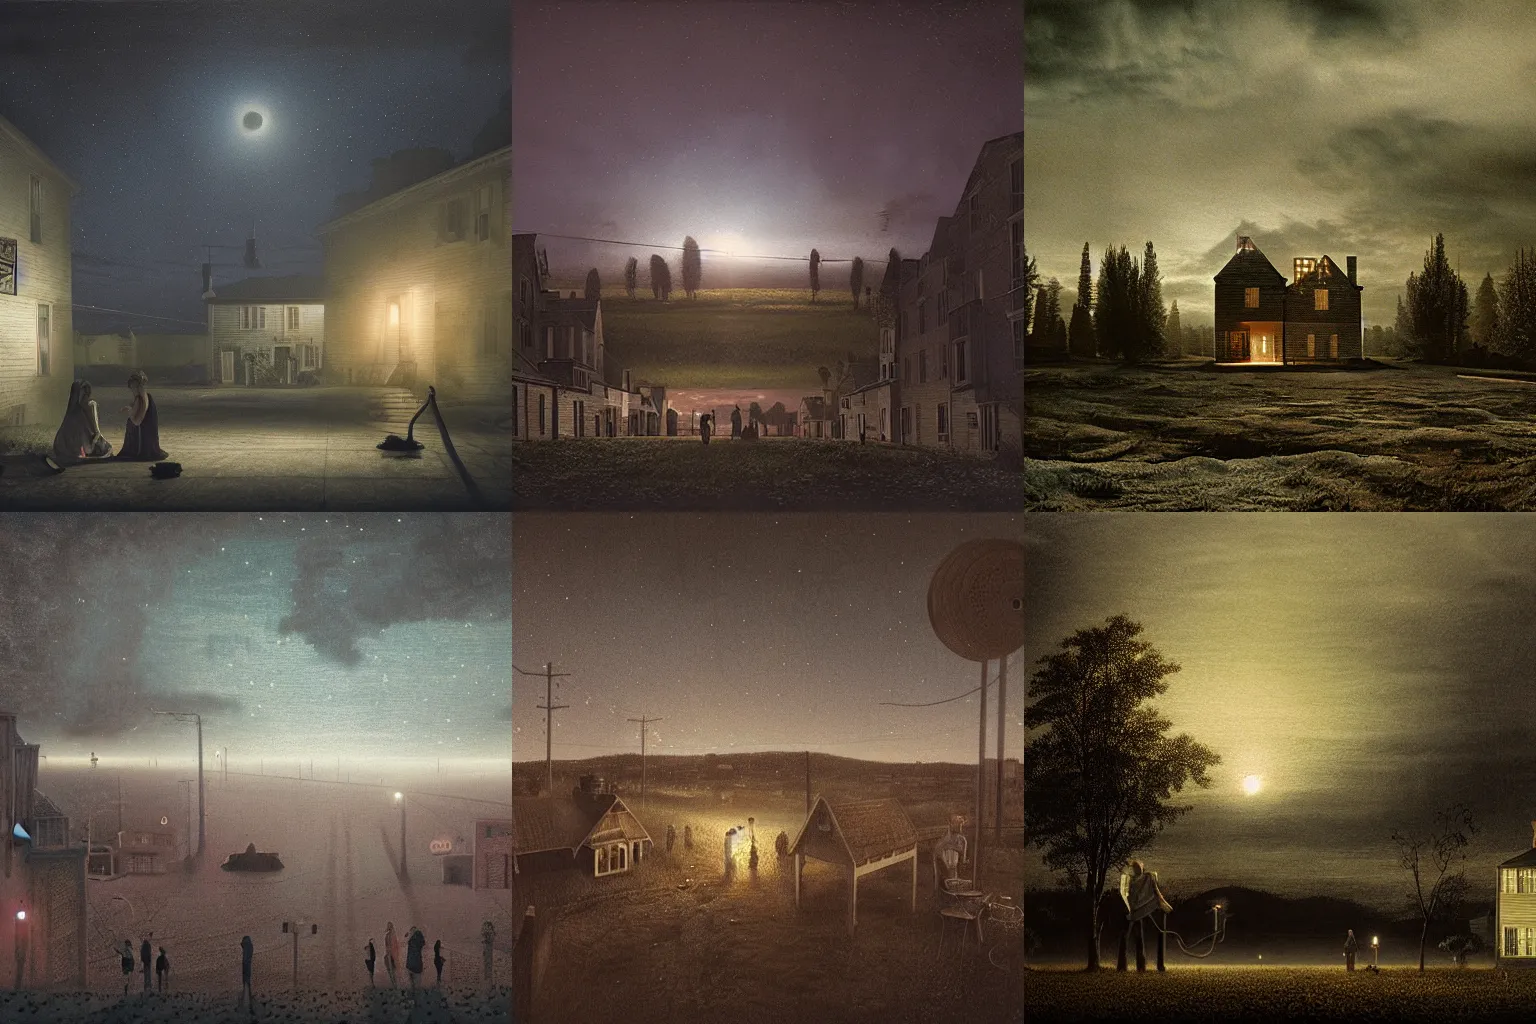 Prompt: the night as vast as us, by grogory crewdson